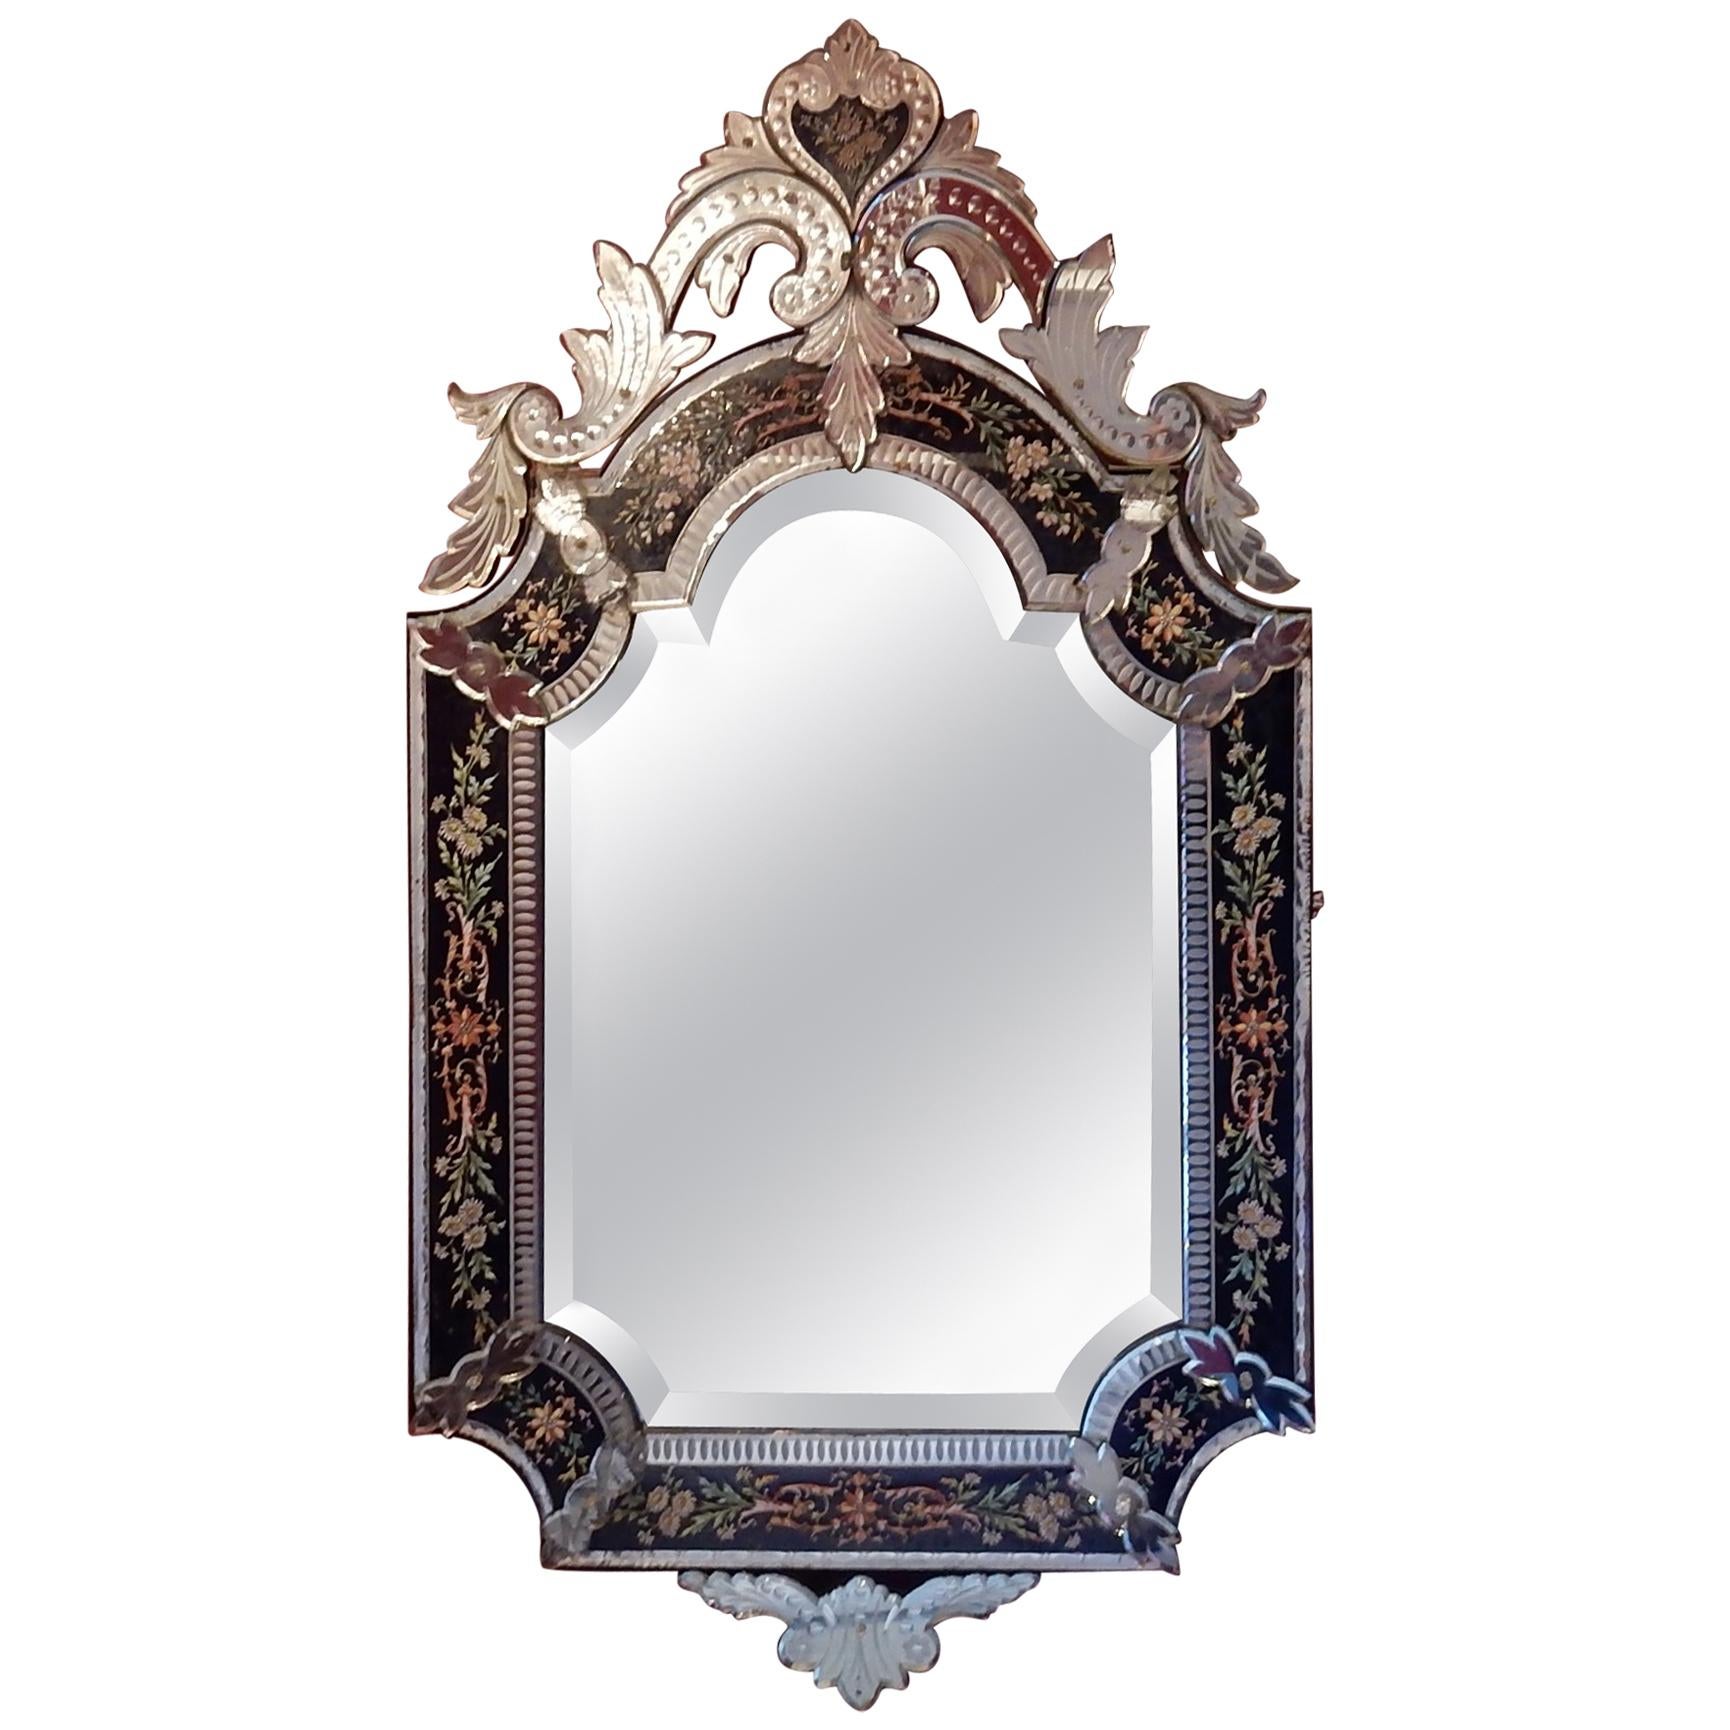 1880-1900 Venetian Mirror N3 with Pediment, Blue Glass Adorned with Flowers For Sale